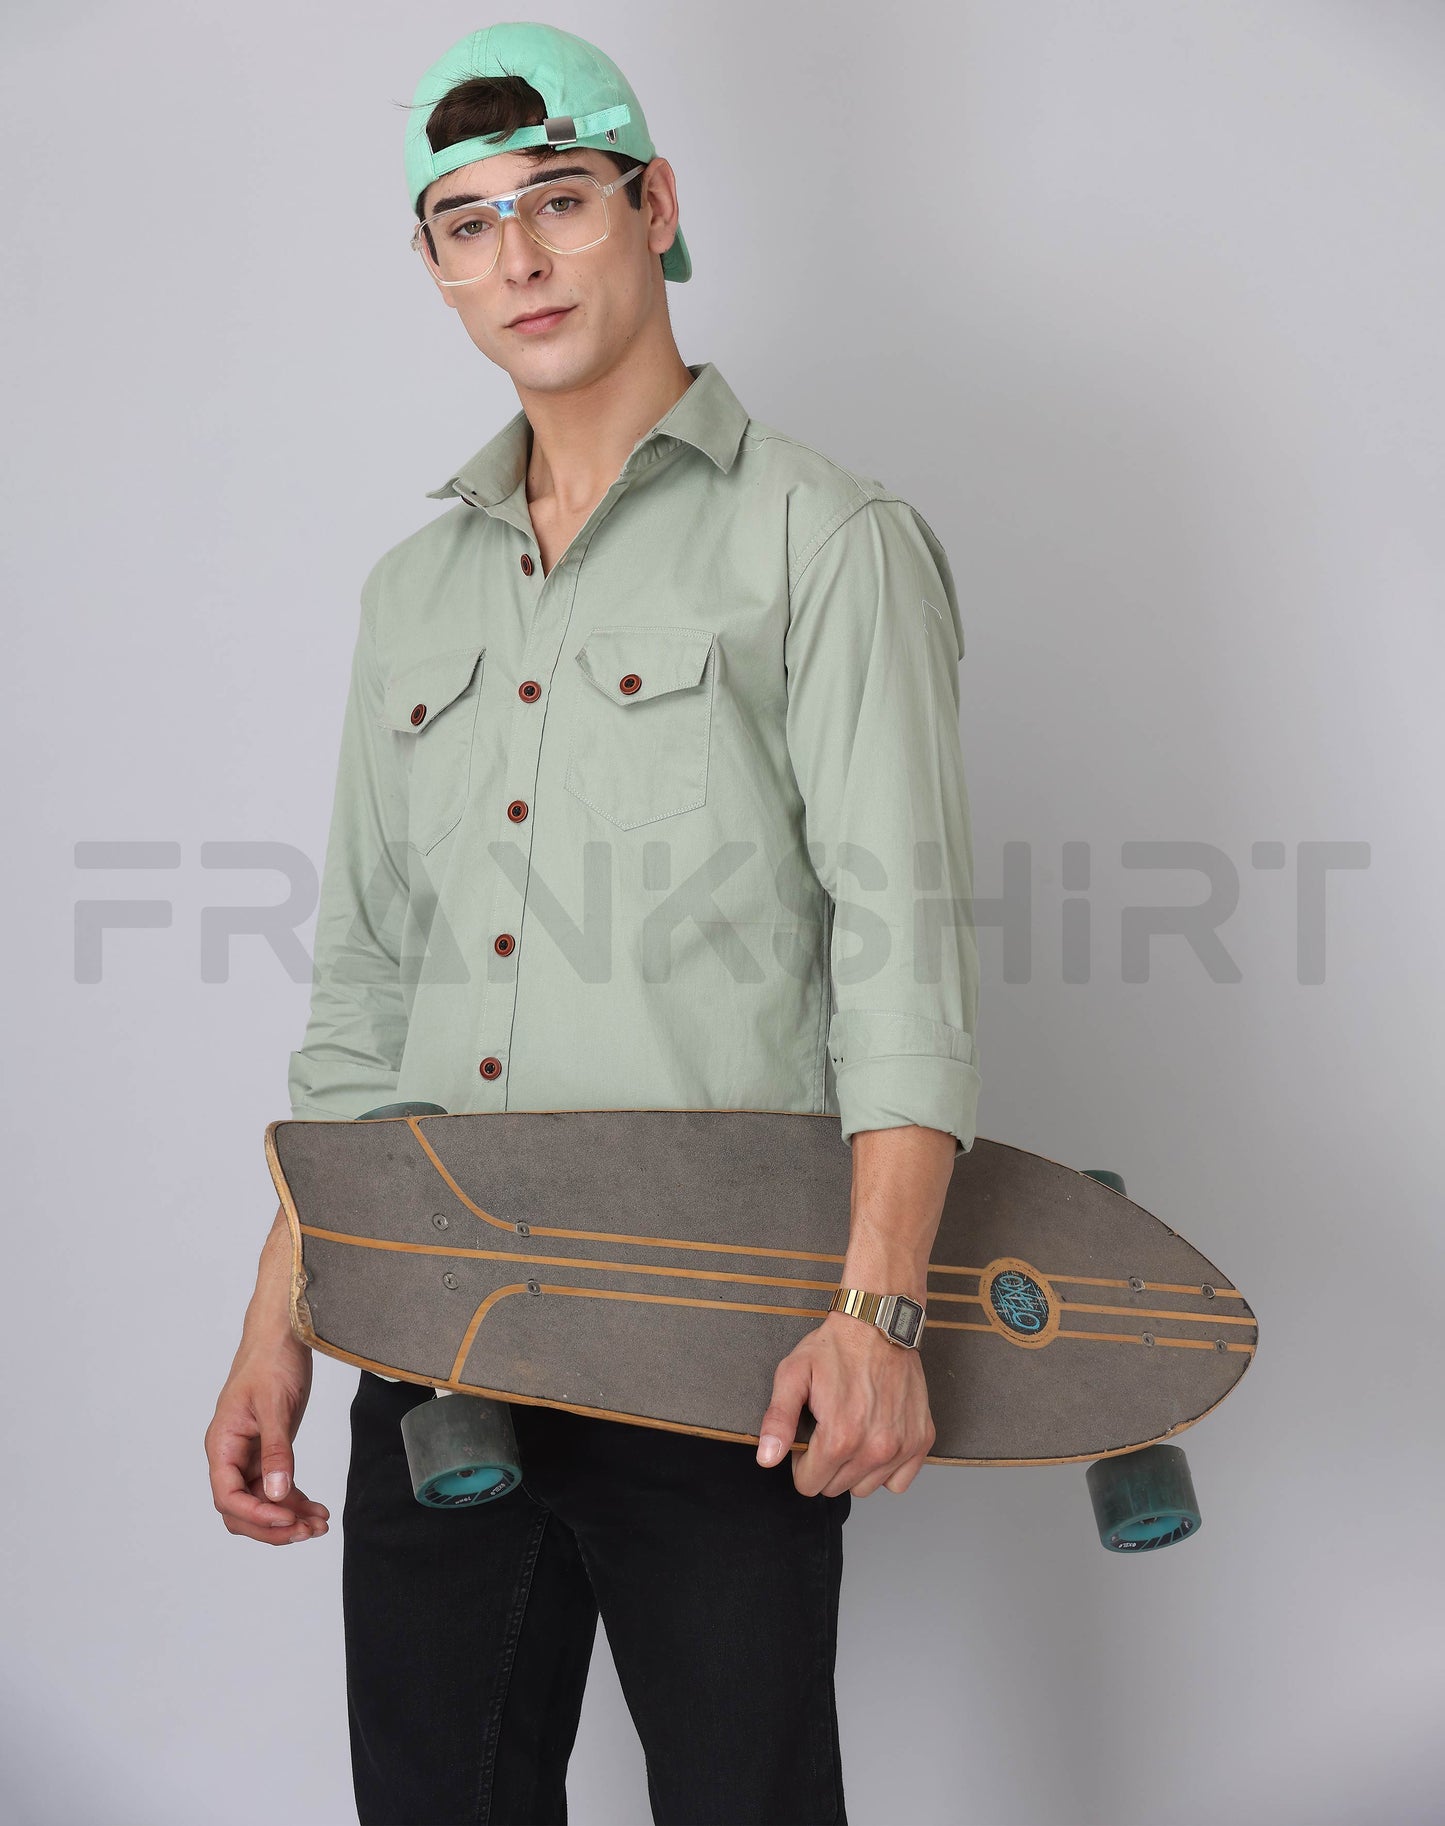 Frankshirt Double Pocket Pista Solid Tailored Fit Cotton Casual Shirt for Man